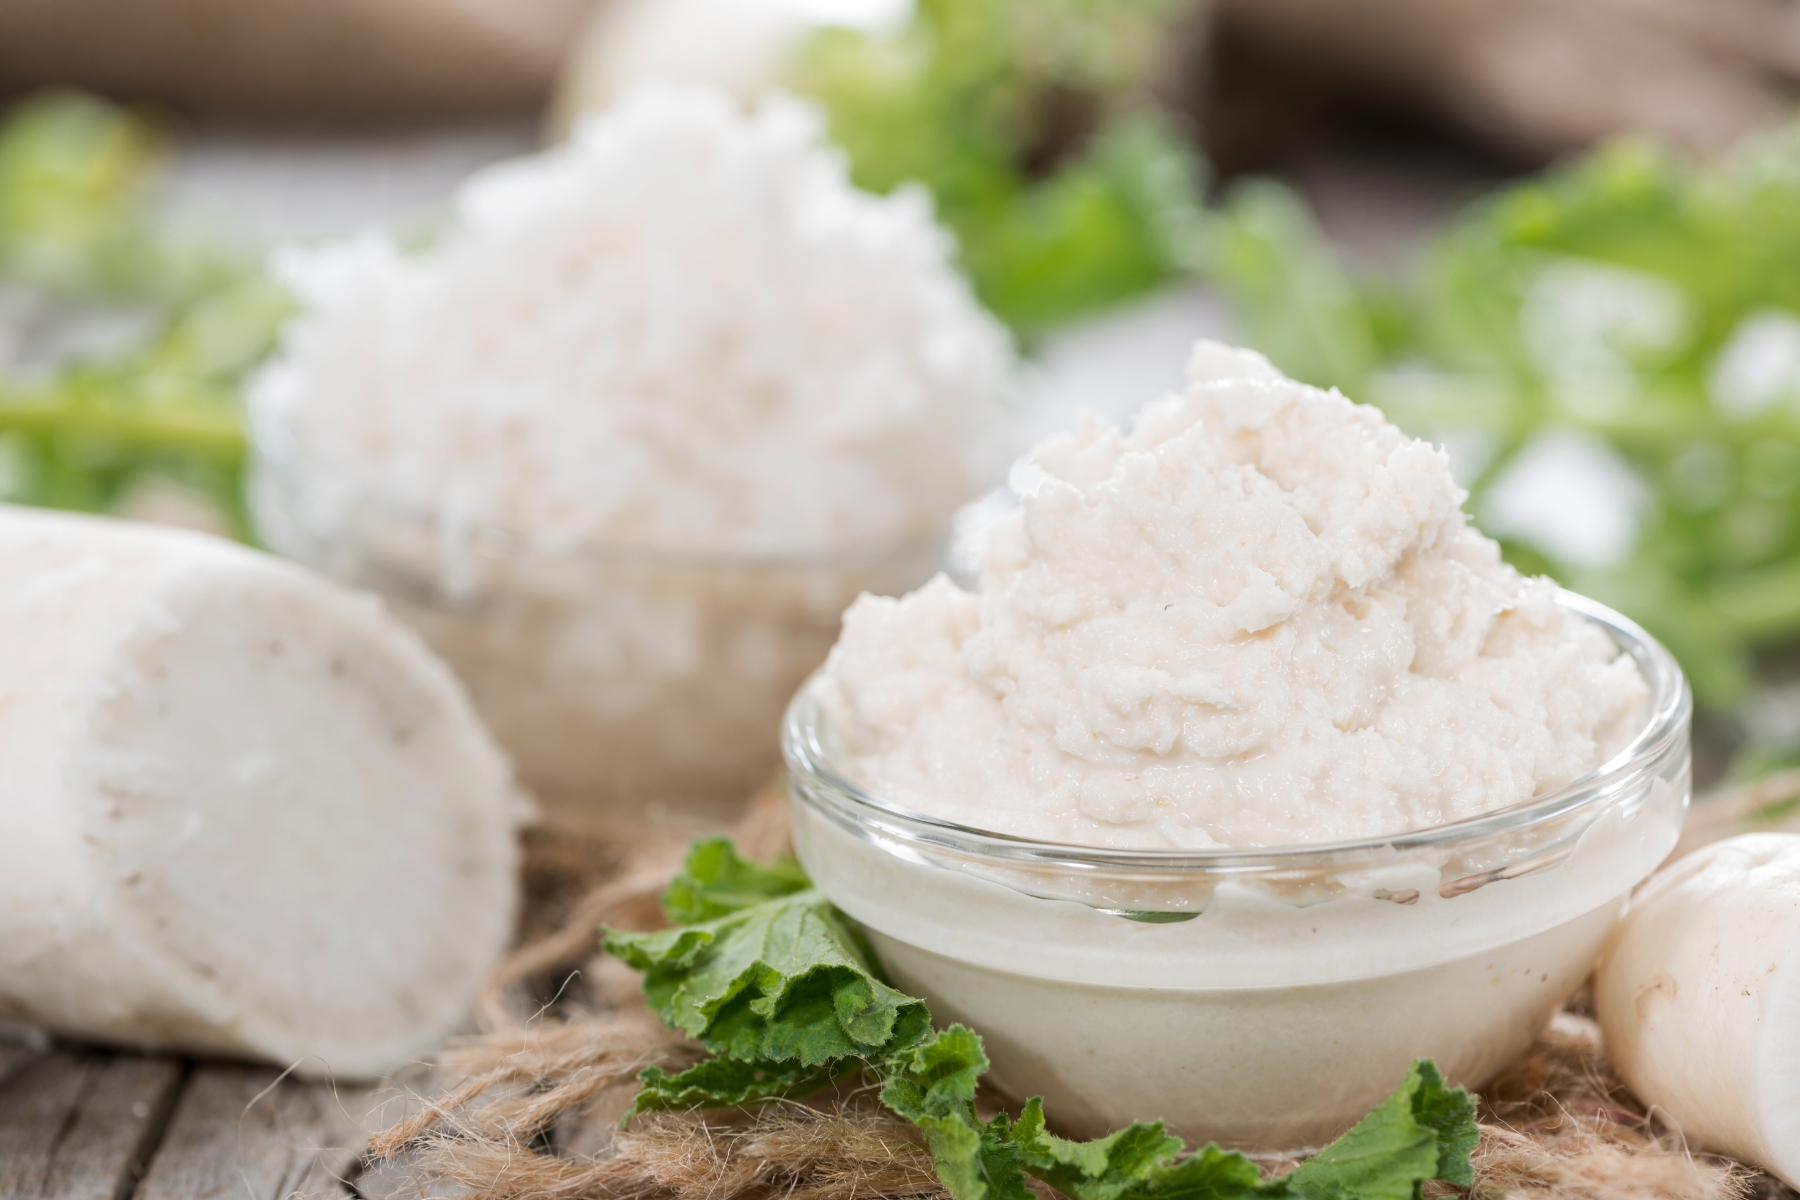 Creamed white horseradish in a small glass dish with greens in the background.